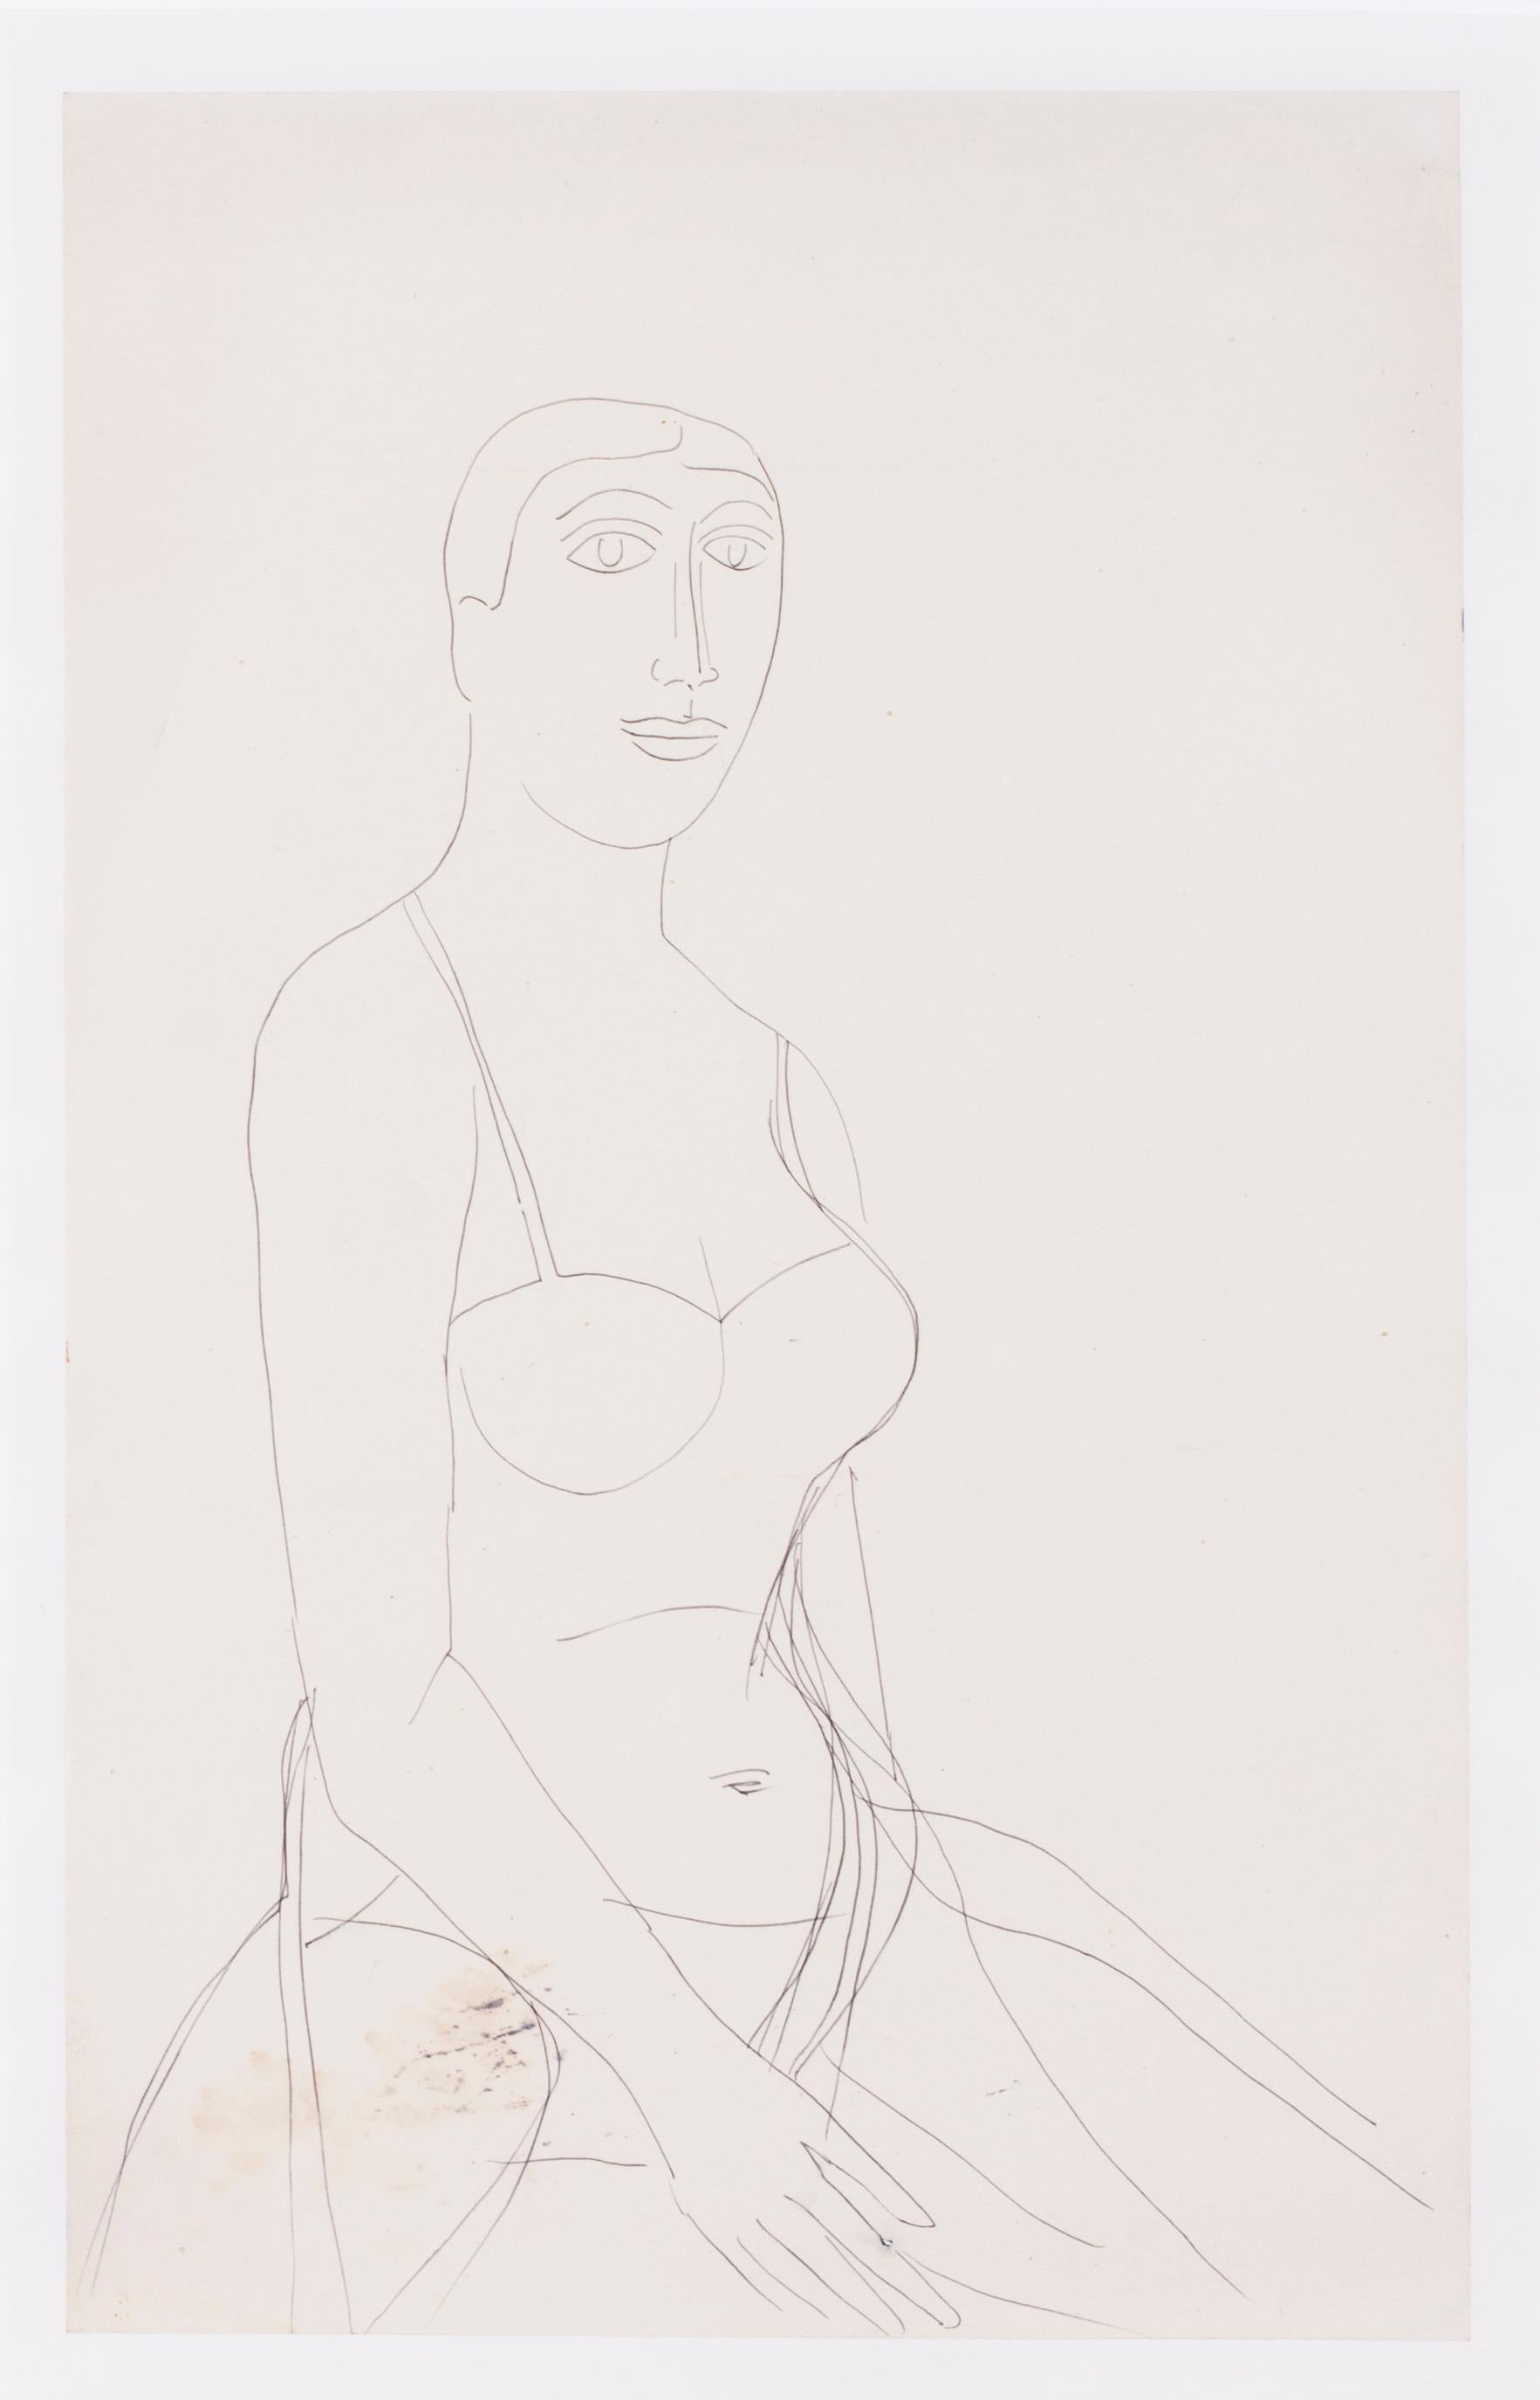 Francis Newton Souza (Indian, 1924 – 2002)
The artist’s model
Pen on paper
15.3/4 x 9.7/8 in. (40 x 25 cm.)

Provenance: The artist’s wife Maria, Nee Figueiredo, gifted to her nephew

These examples were saved from being burnt on a bonfire by the